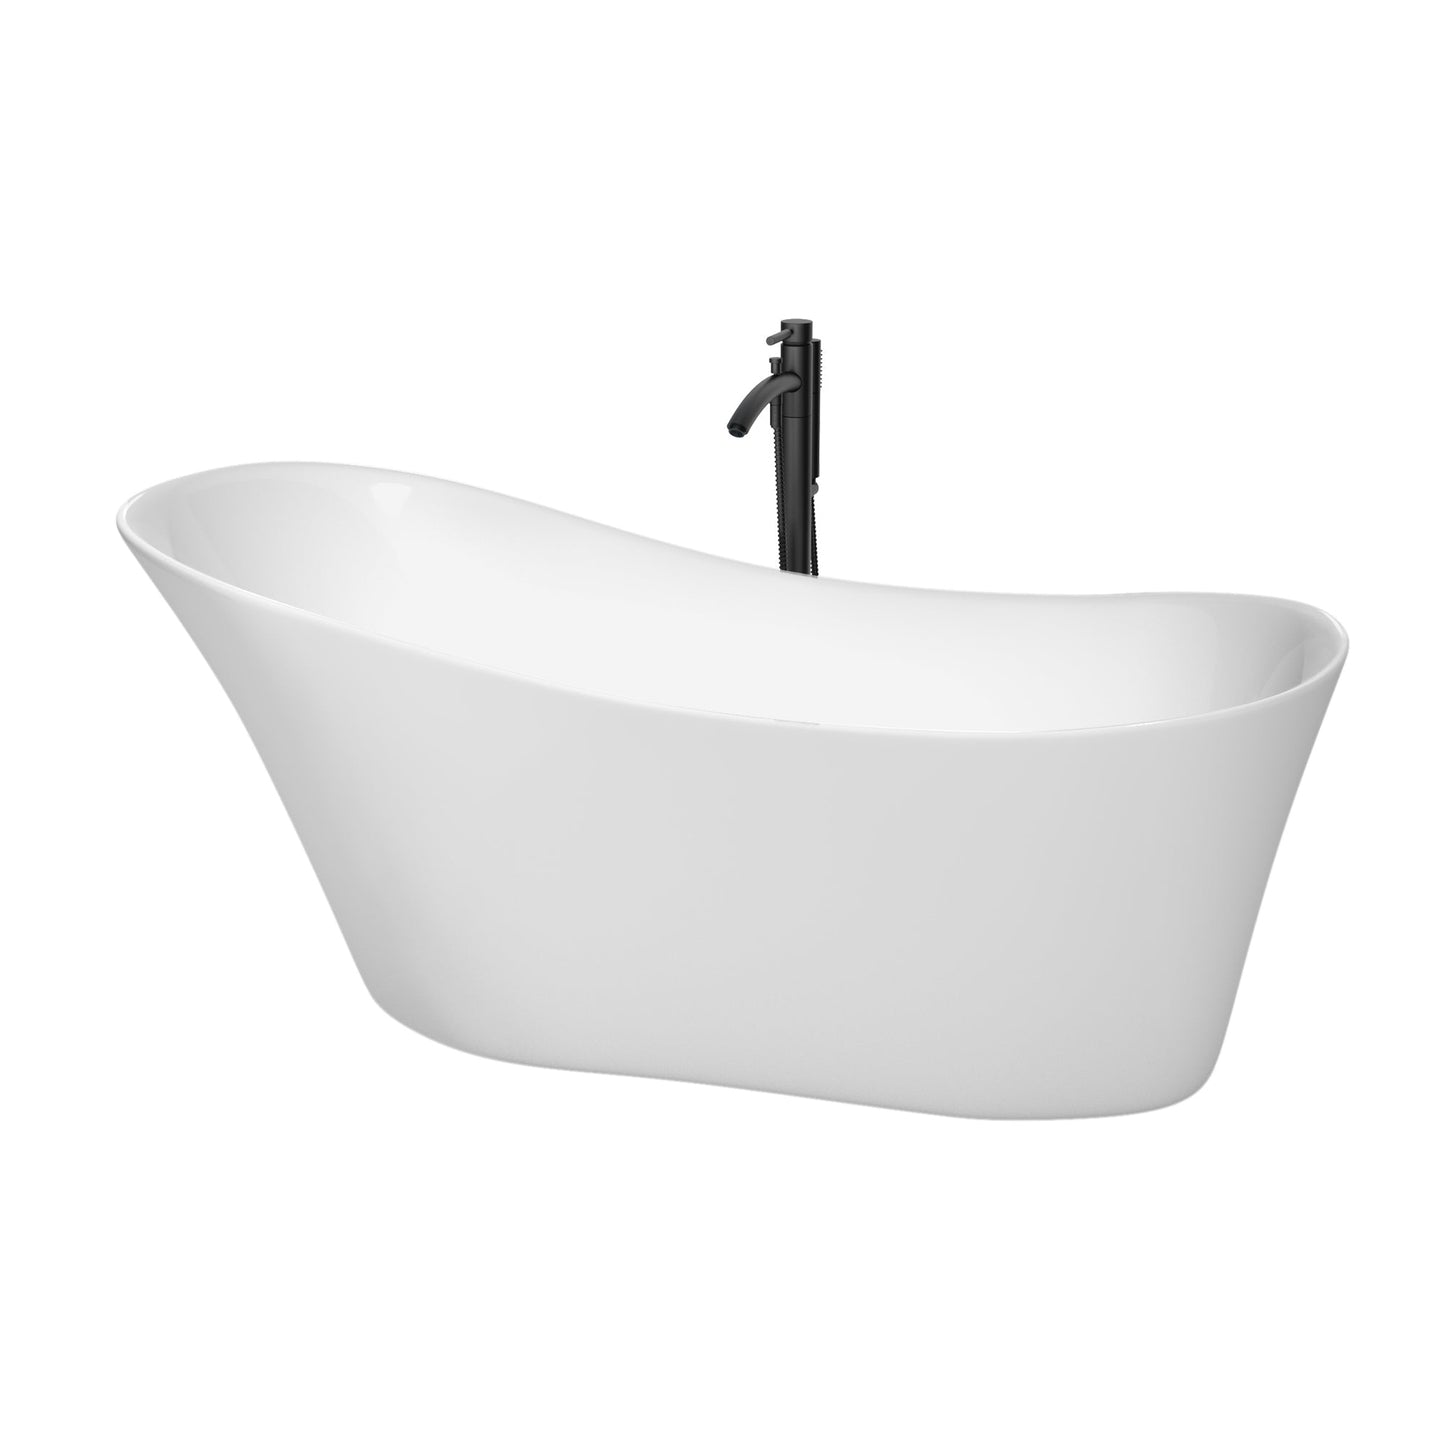 Wyndham Collection Janice 67" Freestanding Bathtub in White With Shiny White Trim and Floor Mounted Faucet in Matte Black